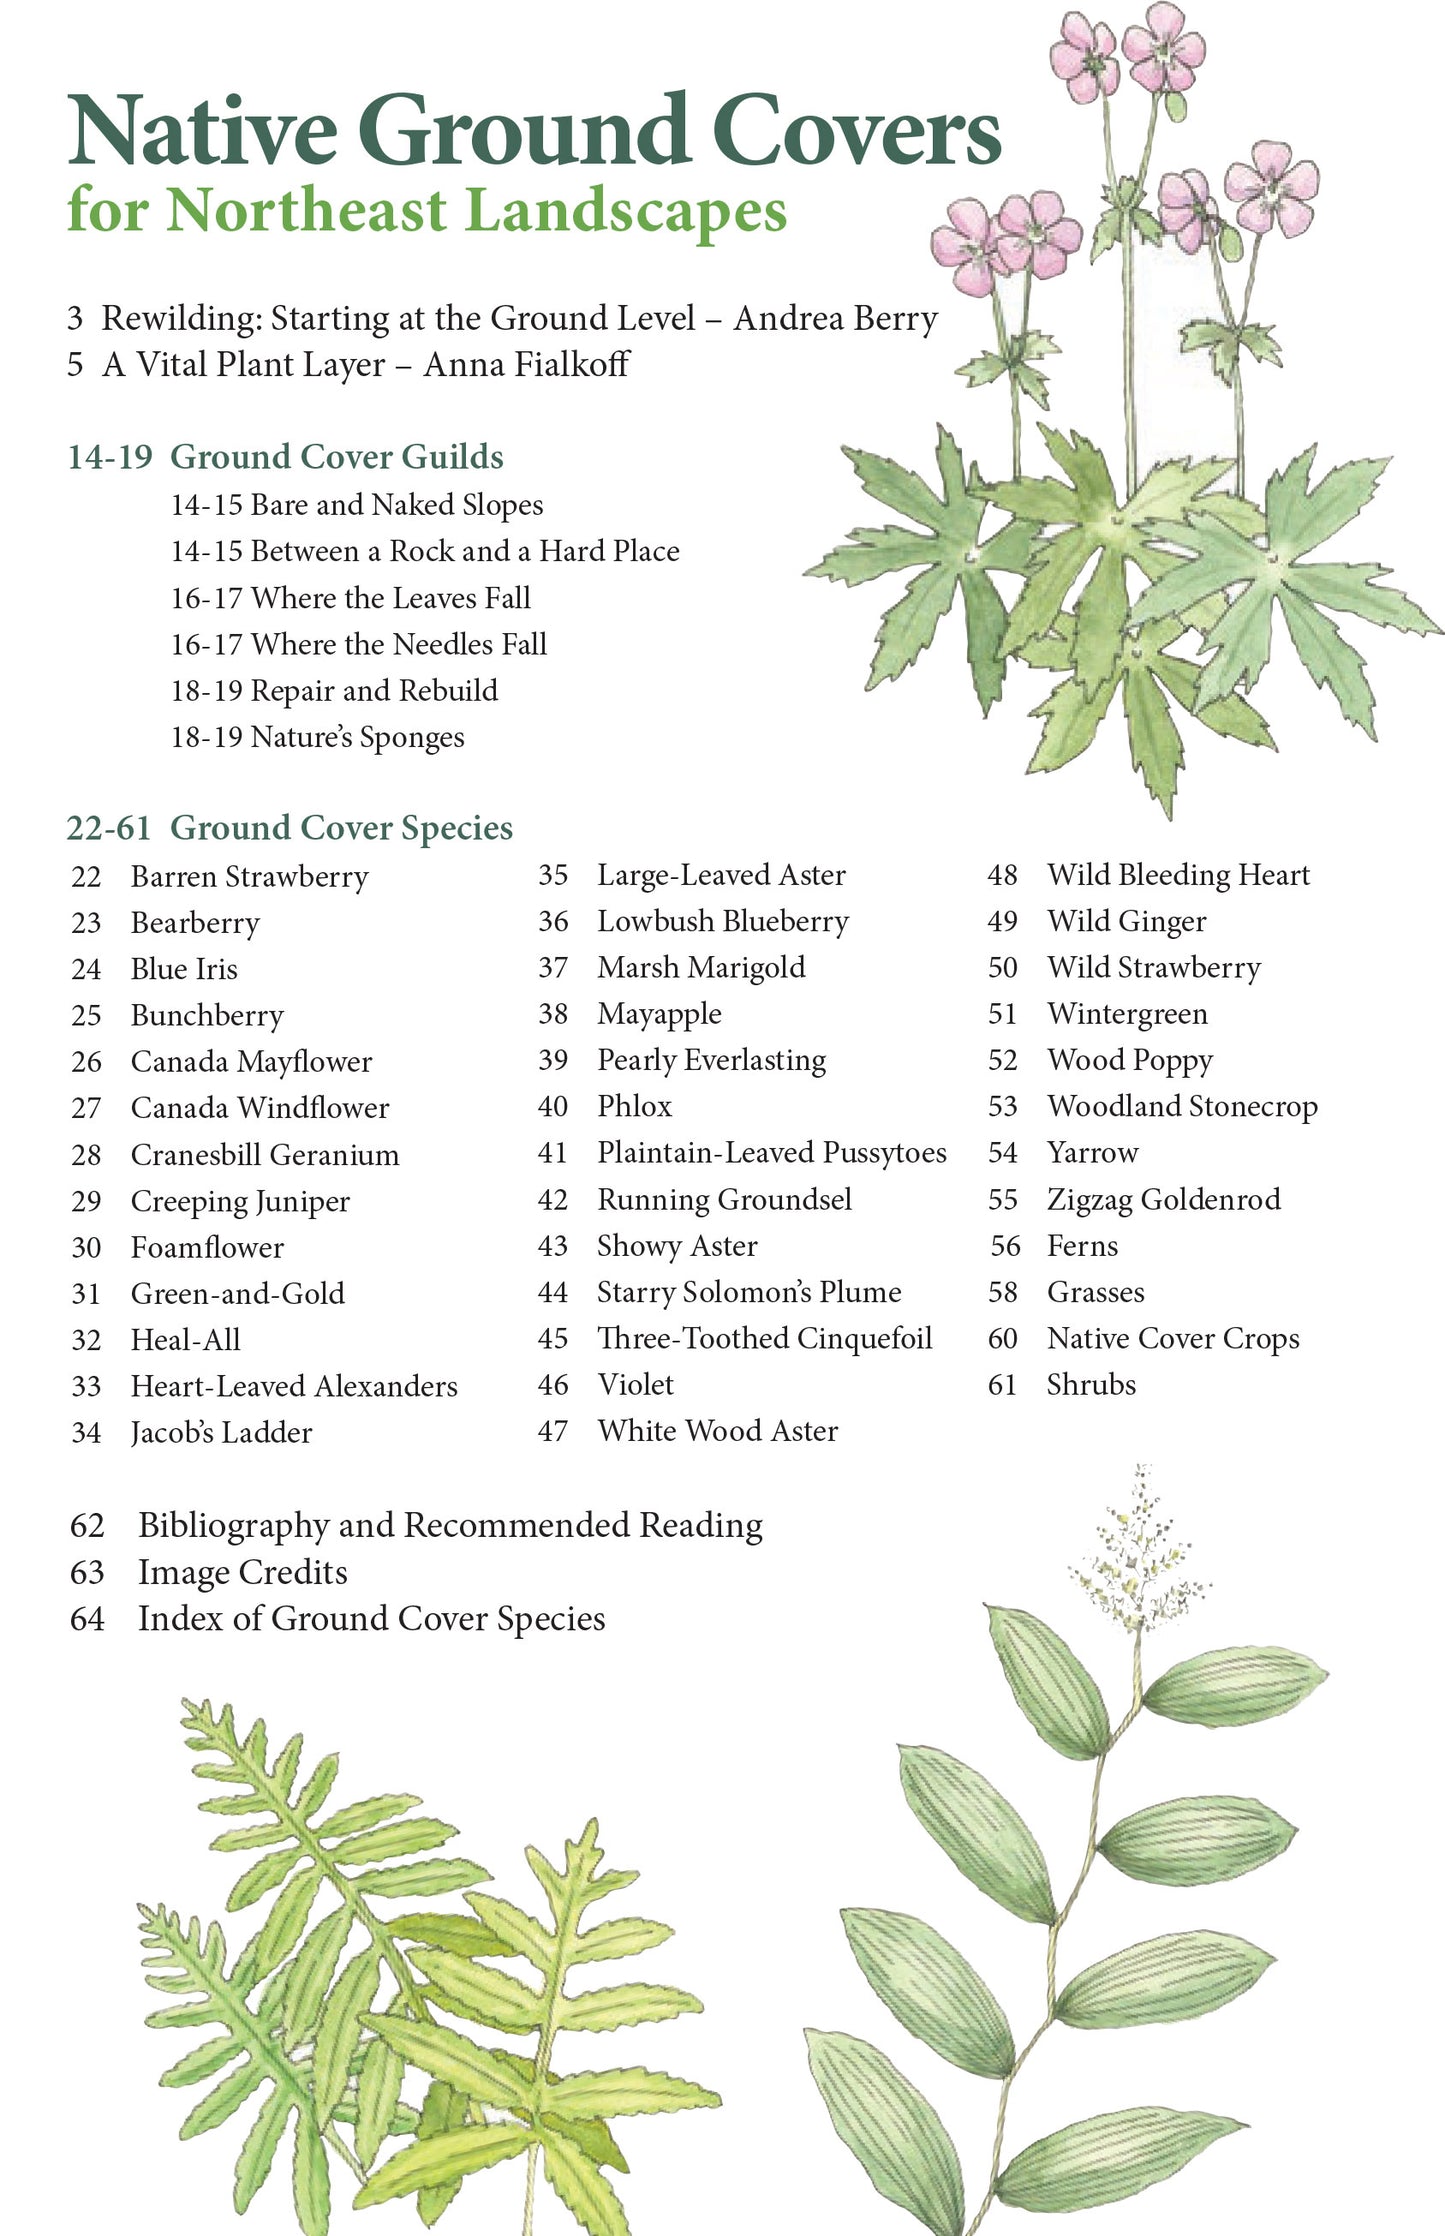 Table of contents for Native Ground Covers for Northeast Landscapes